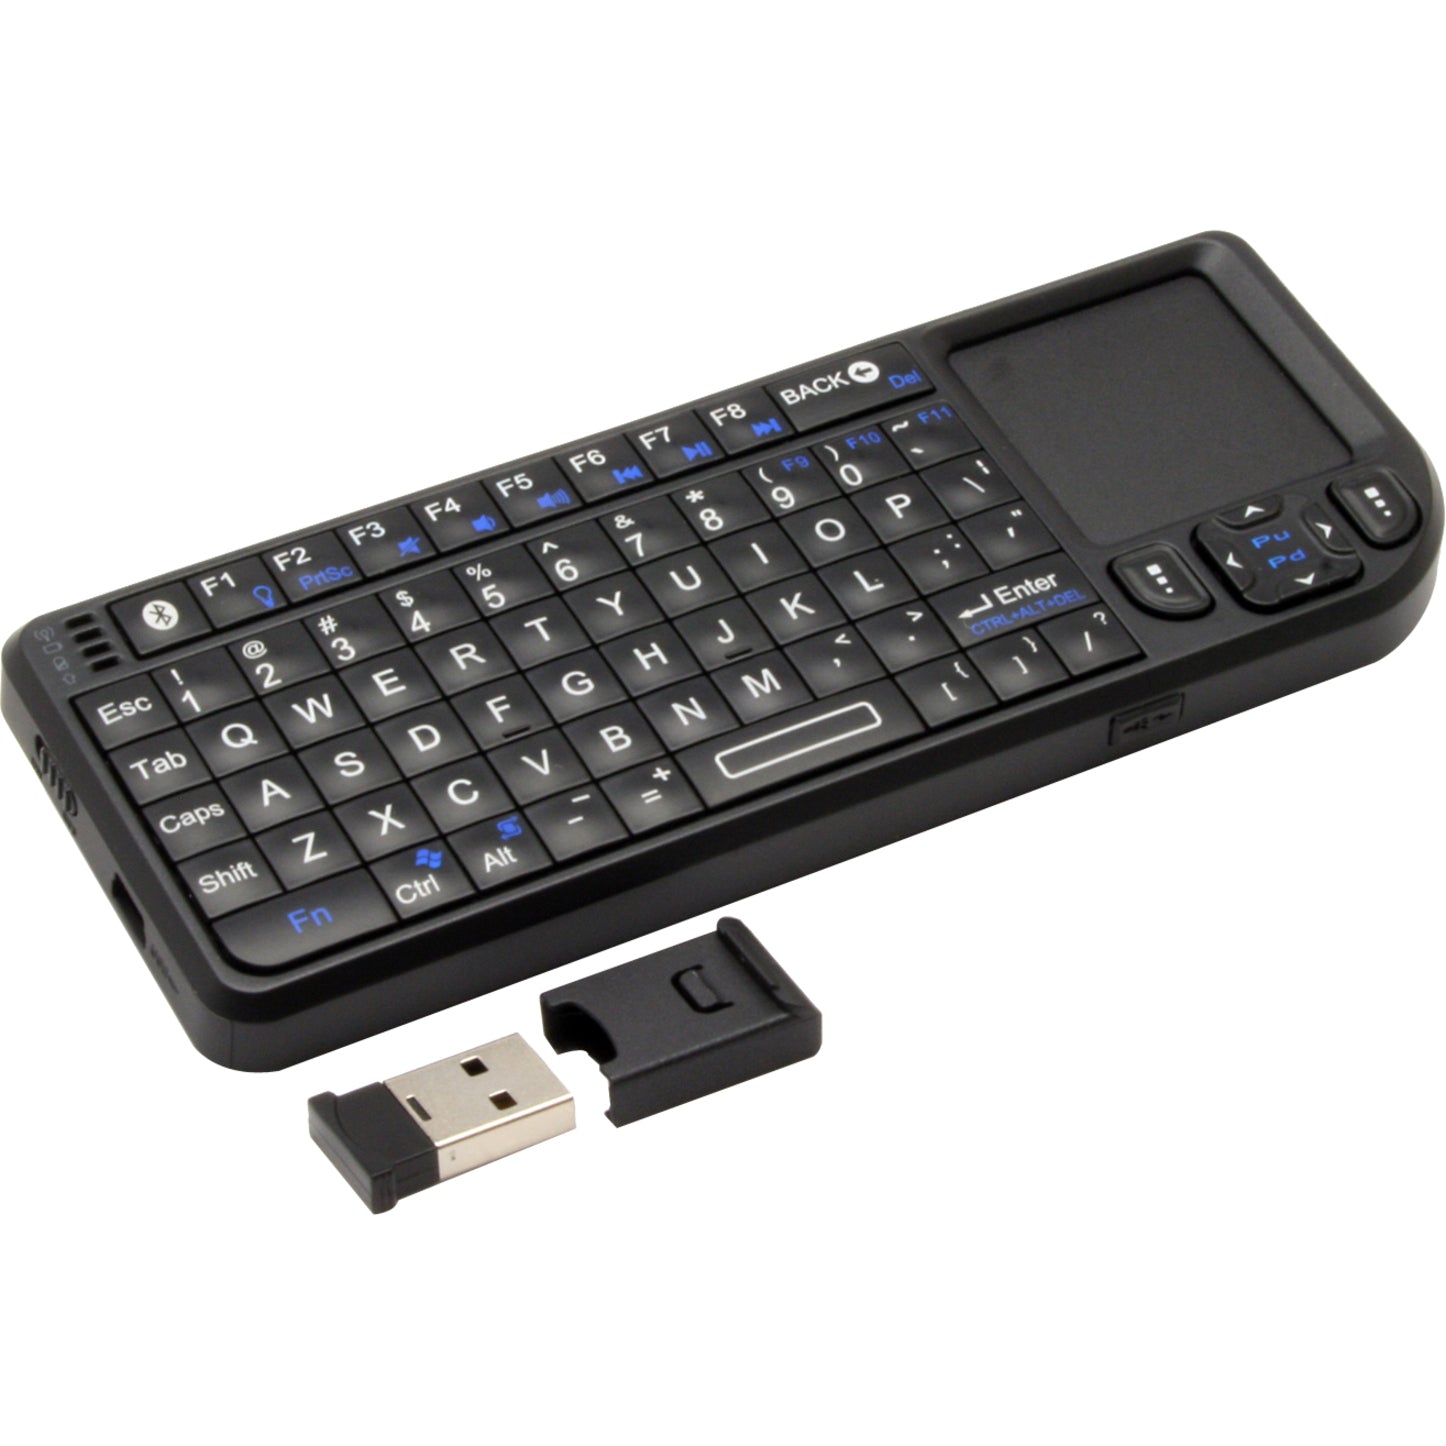 VisionTek 900335 CandyBoard Keyboard, QWERTY, Integrated Backlighting, Bluetooth, Wireless, 30 ft Operating Distance